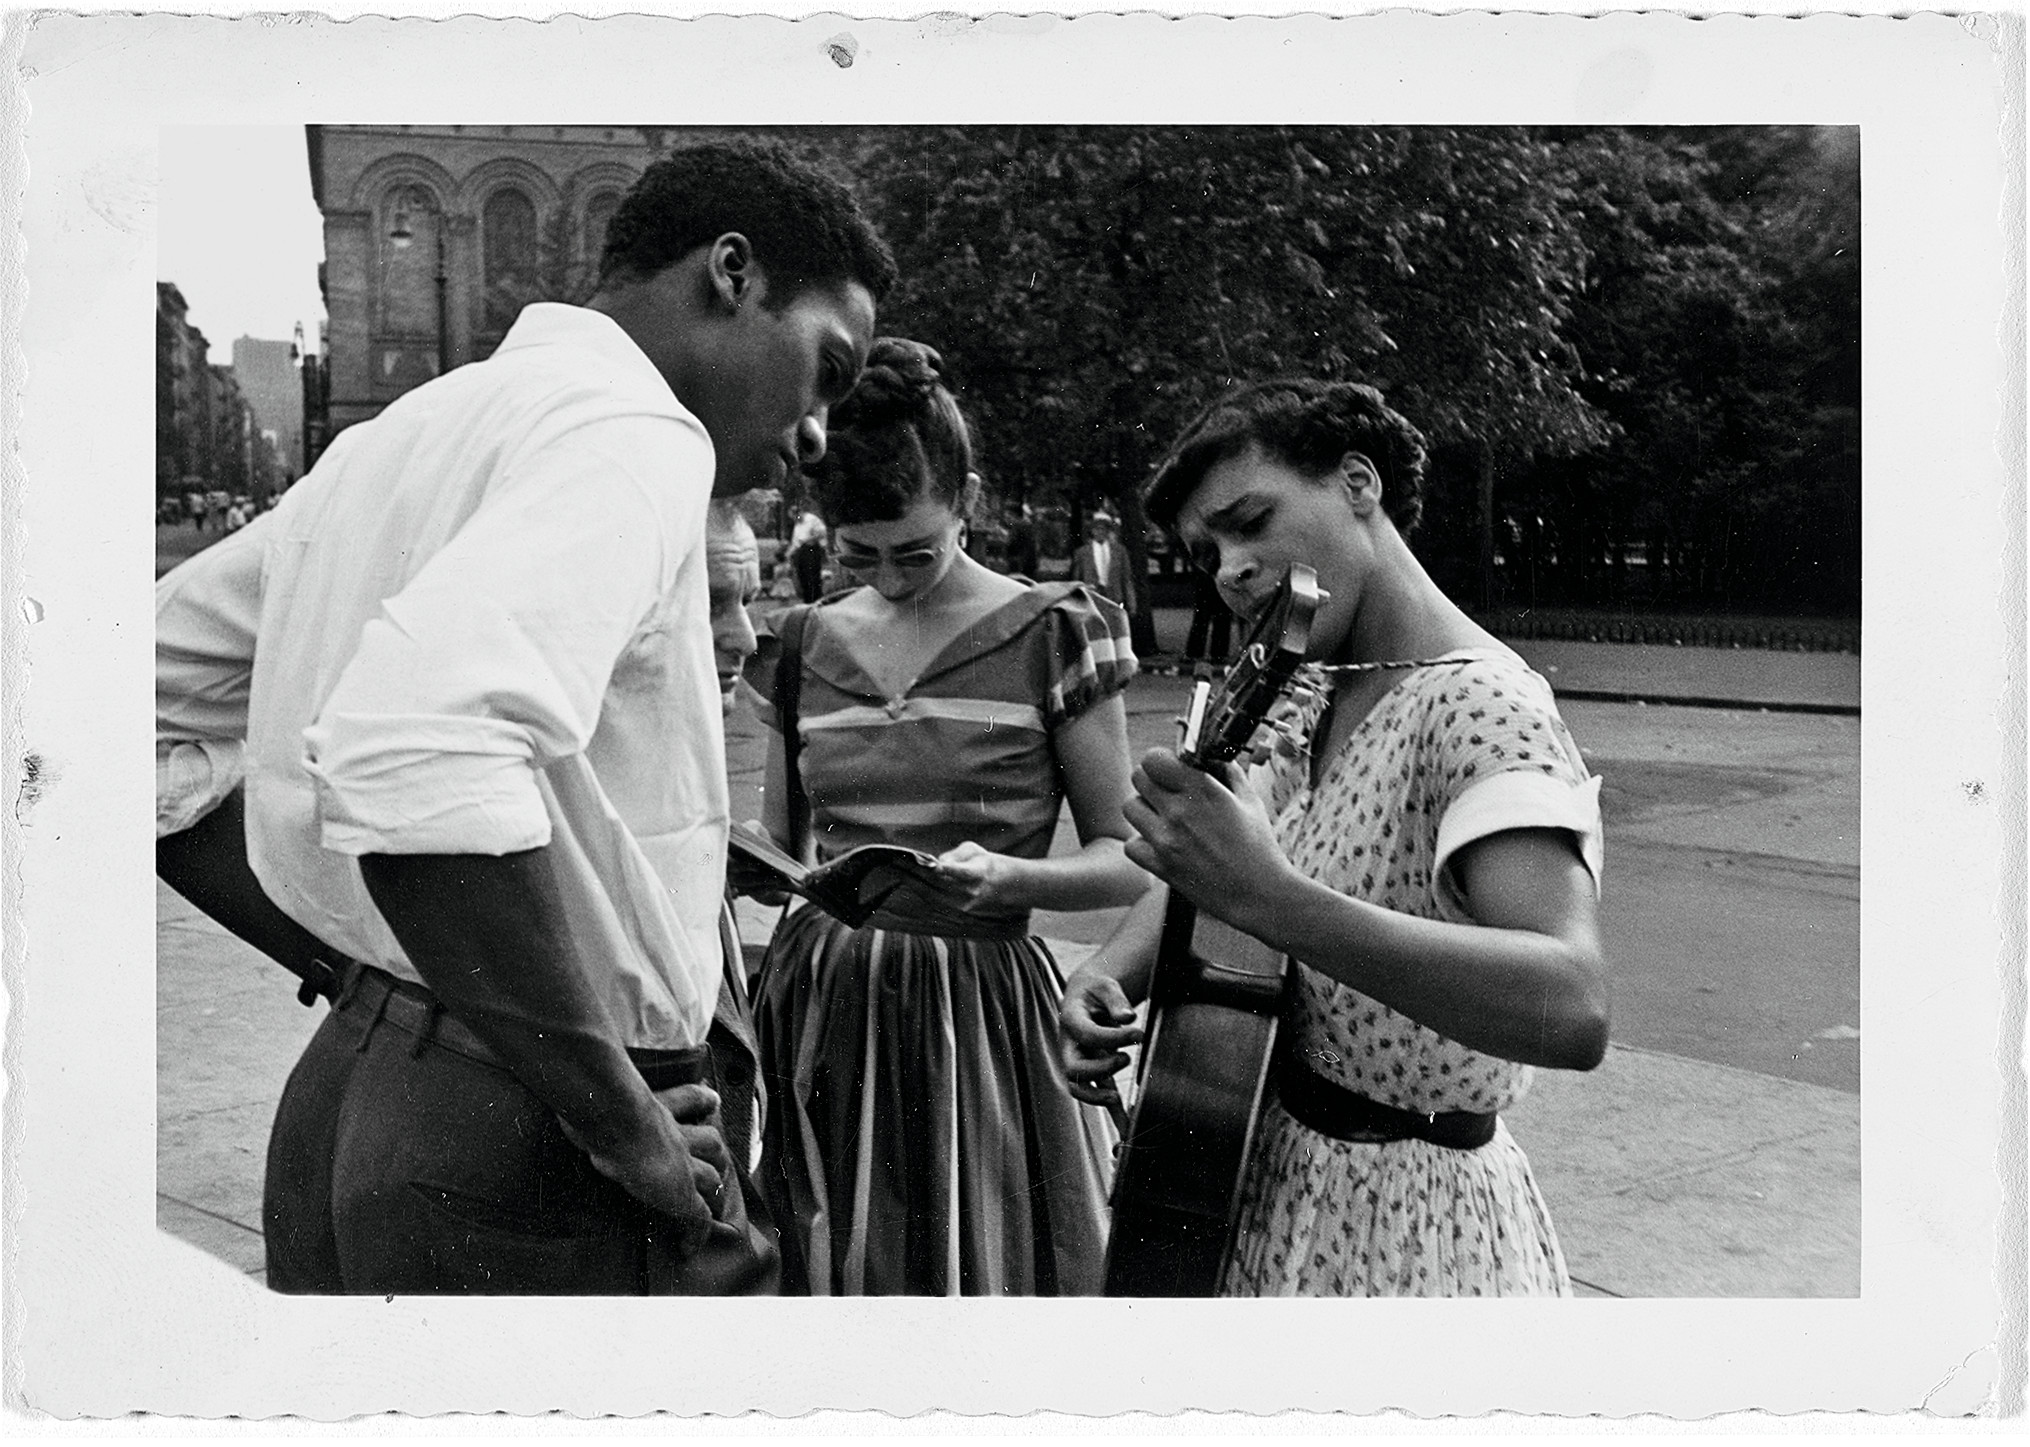 Charles White, Musicians in Washington Square Park, 1950s, private collection, Altadena, © The Charles White Archives, digital image © Museum of Modern Art, New York